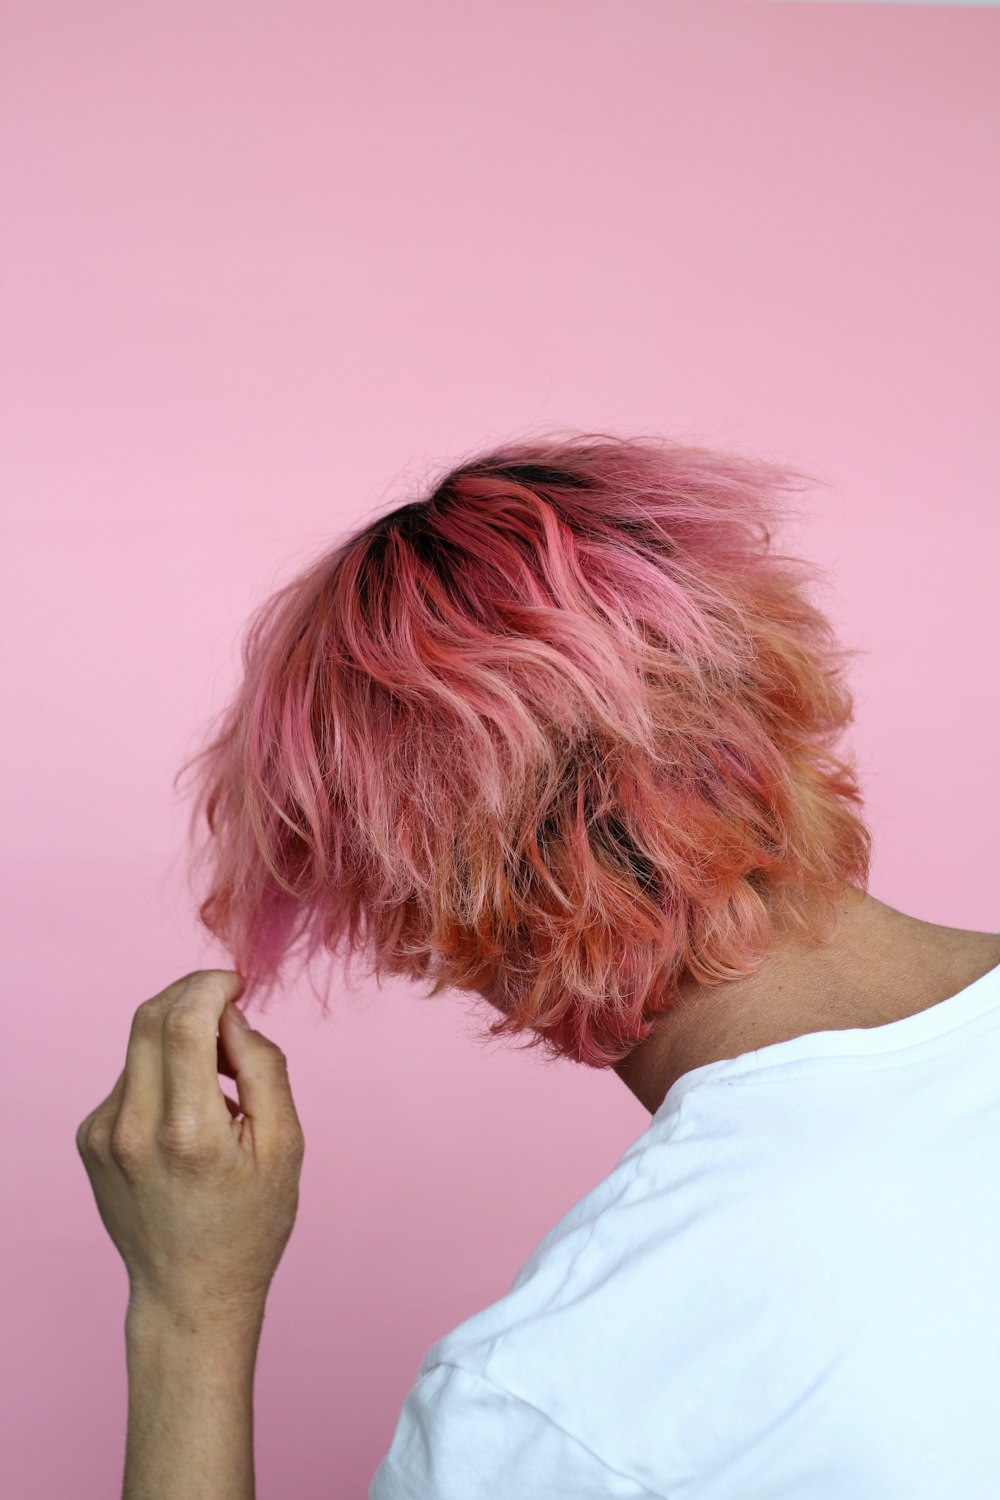 person in white top touch hair with pink dye